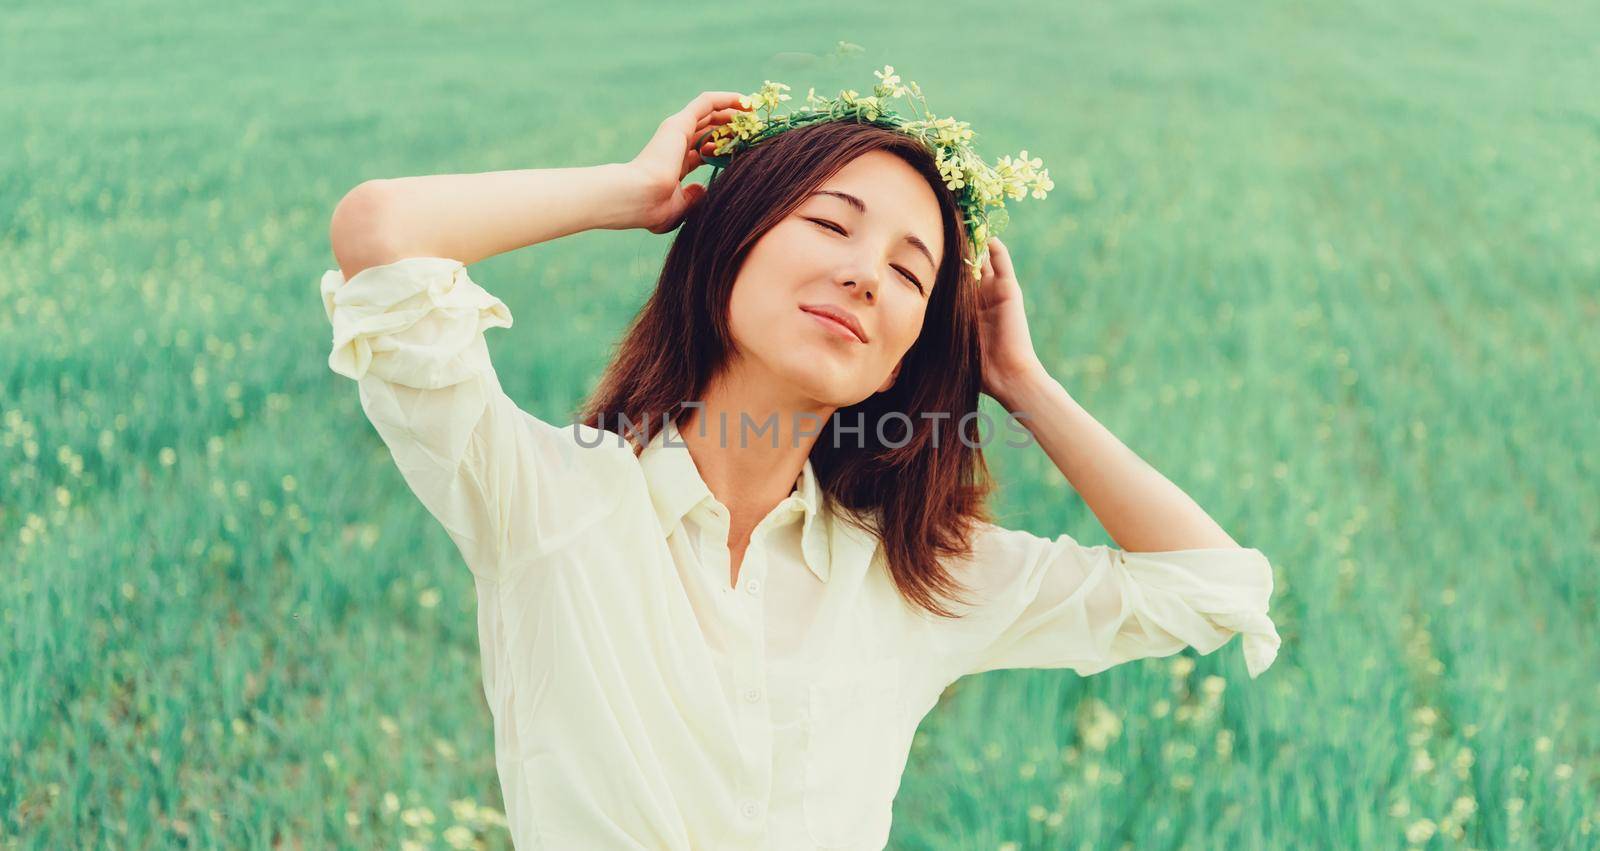 Smiling beautiful young woman with wreath of flowers enjoying a summer day on meadow